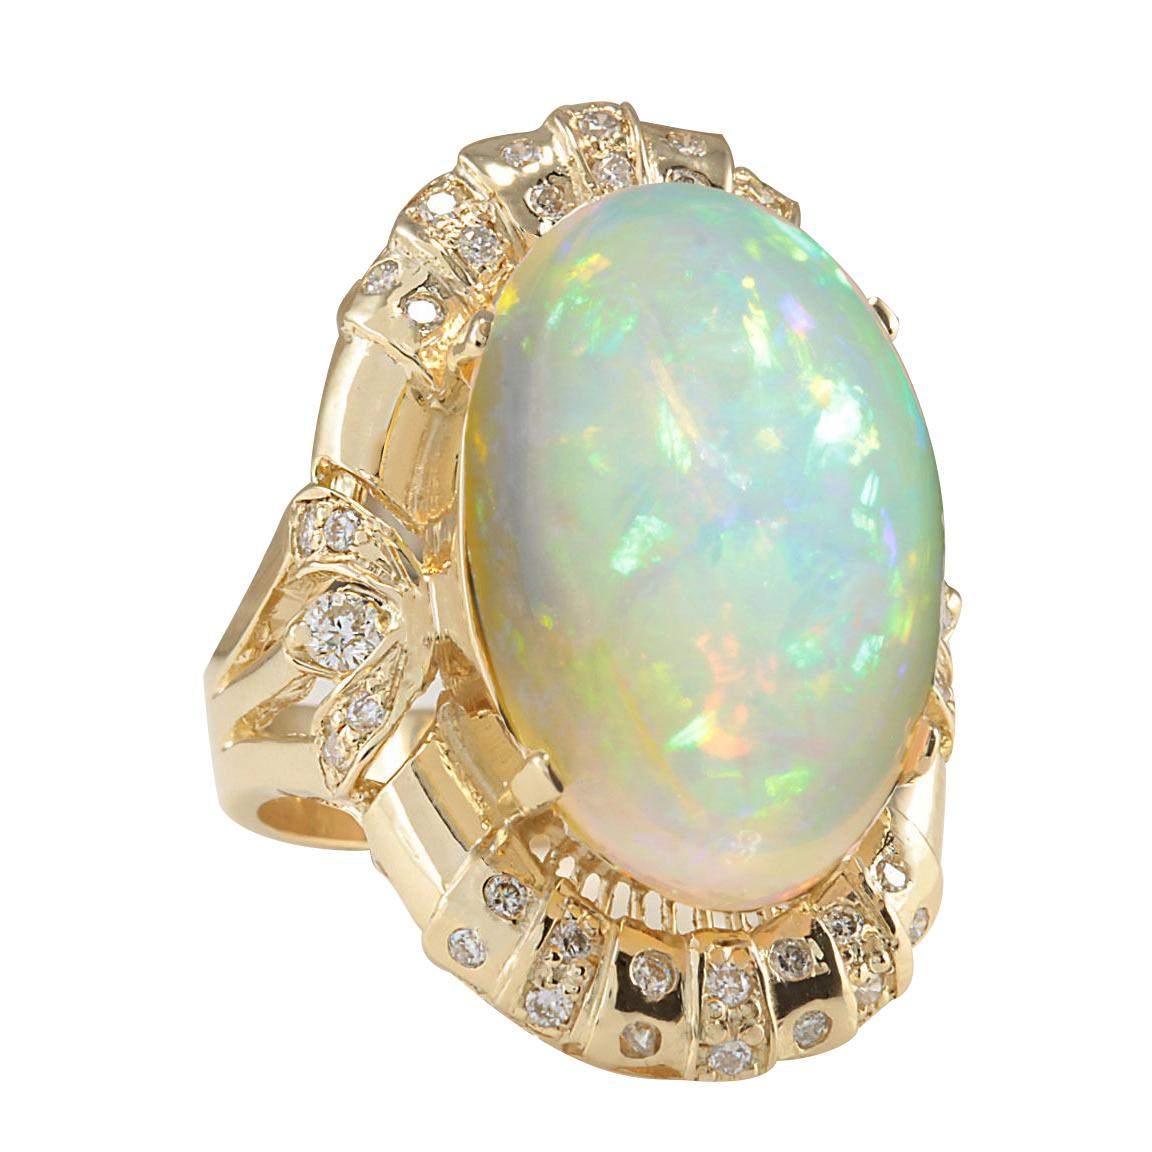 Stamped: 14K Yellow Gold
Total Ring Weight: 10.9 Grams
Total Natural Opal Weight is 14.48 Carat (Measures: 20.00x14.00 mm)
Color: Multicolor
Total Natural Diamond Weight is 0.50 Carat
Color: F-G, Clarity: VS2-SI1
Face Measures: 28.80x20.40 mm
Sku: